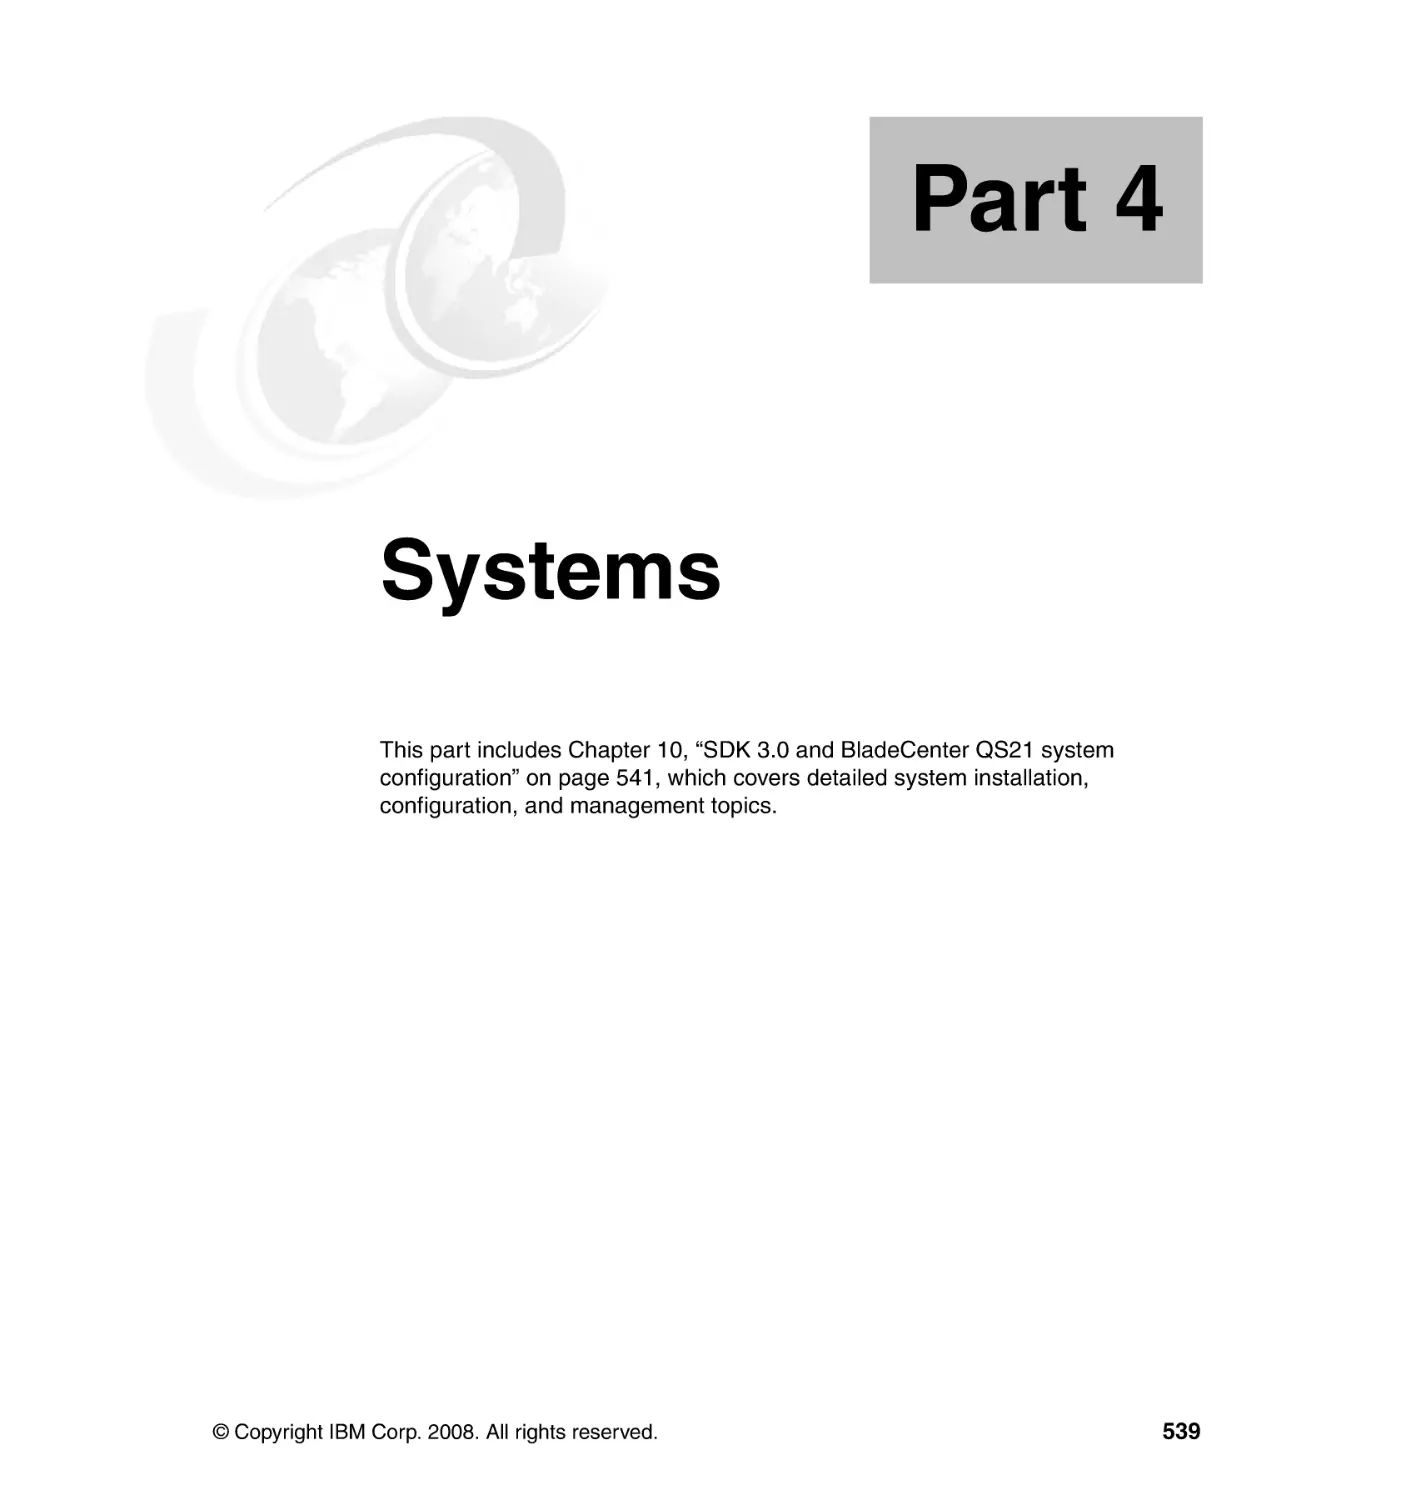 Part 4 Systems